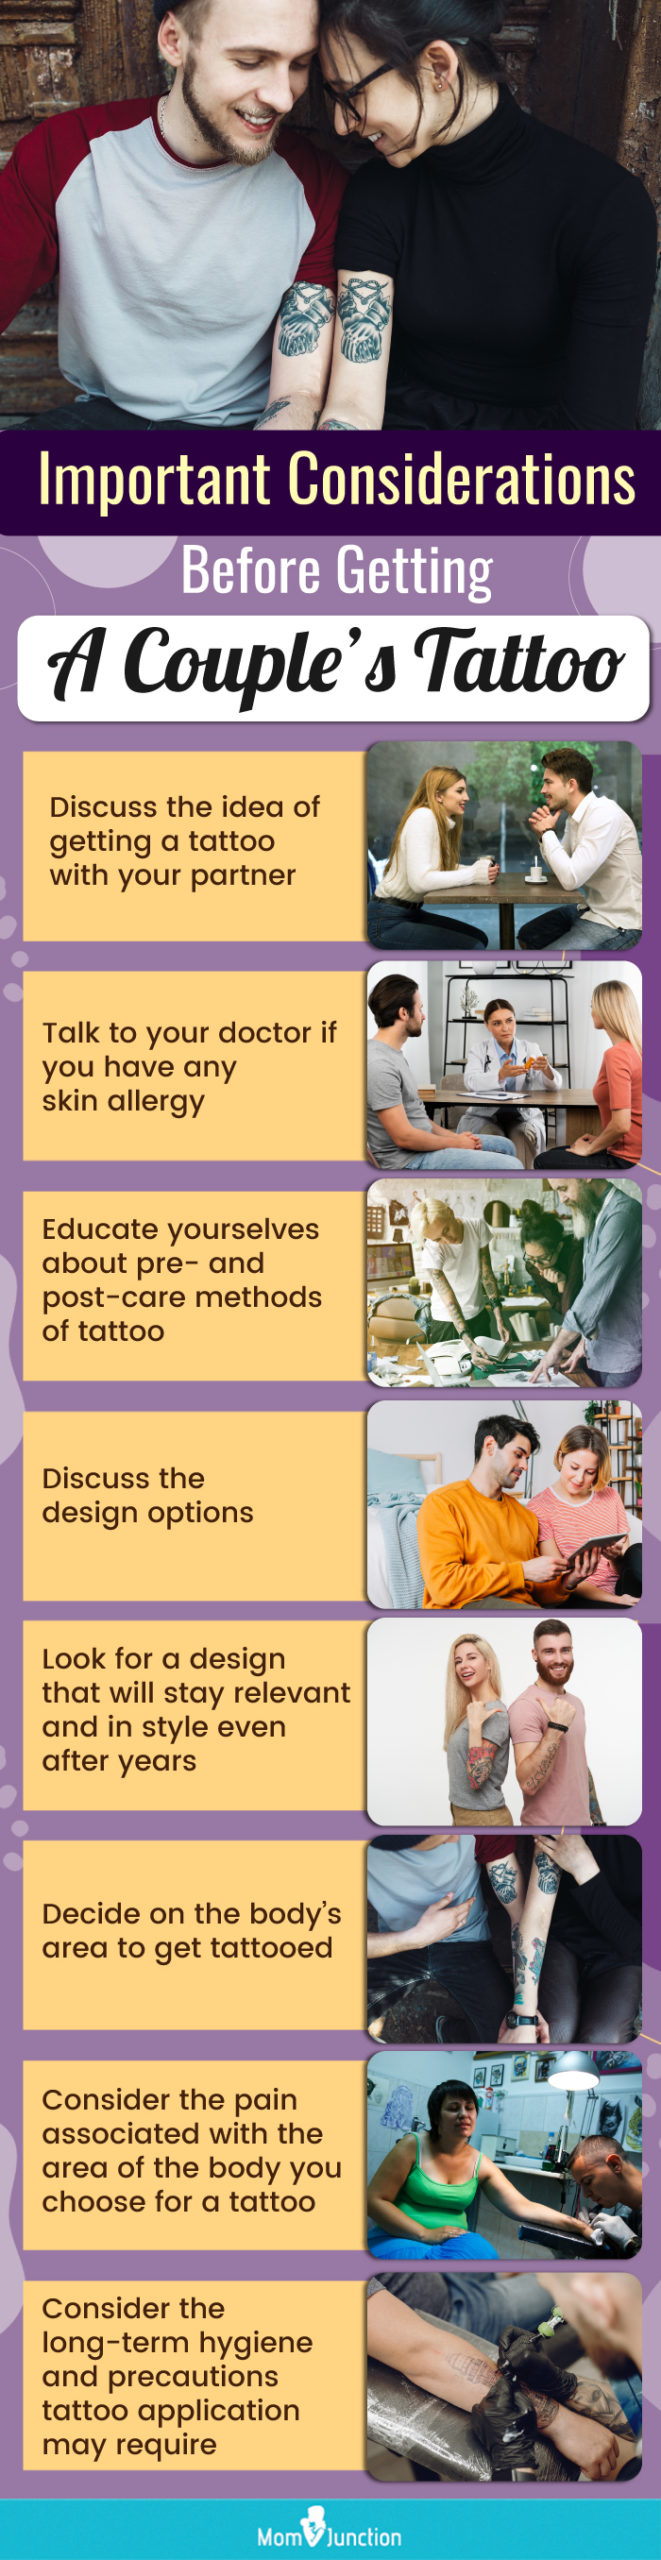 important considerations before getting a couples tattoo (infographic)